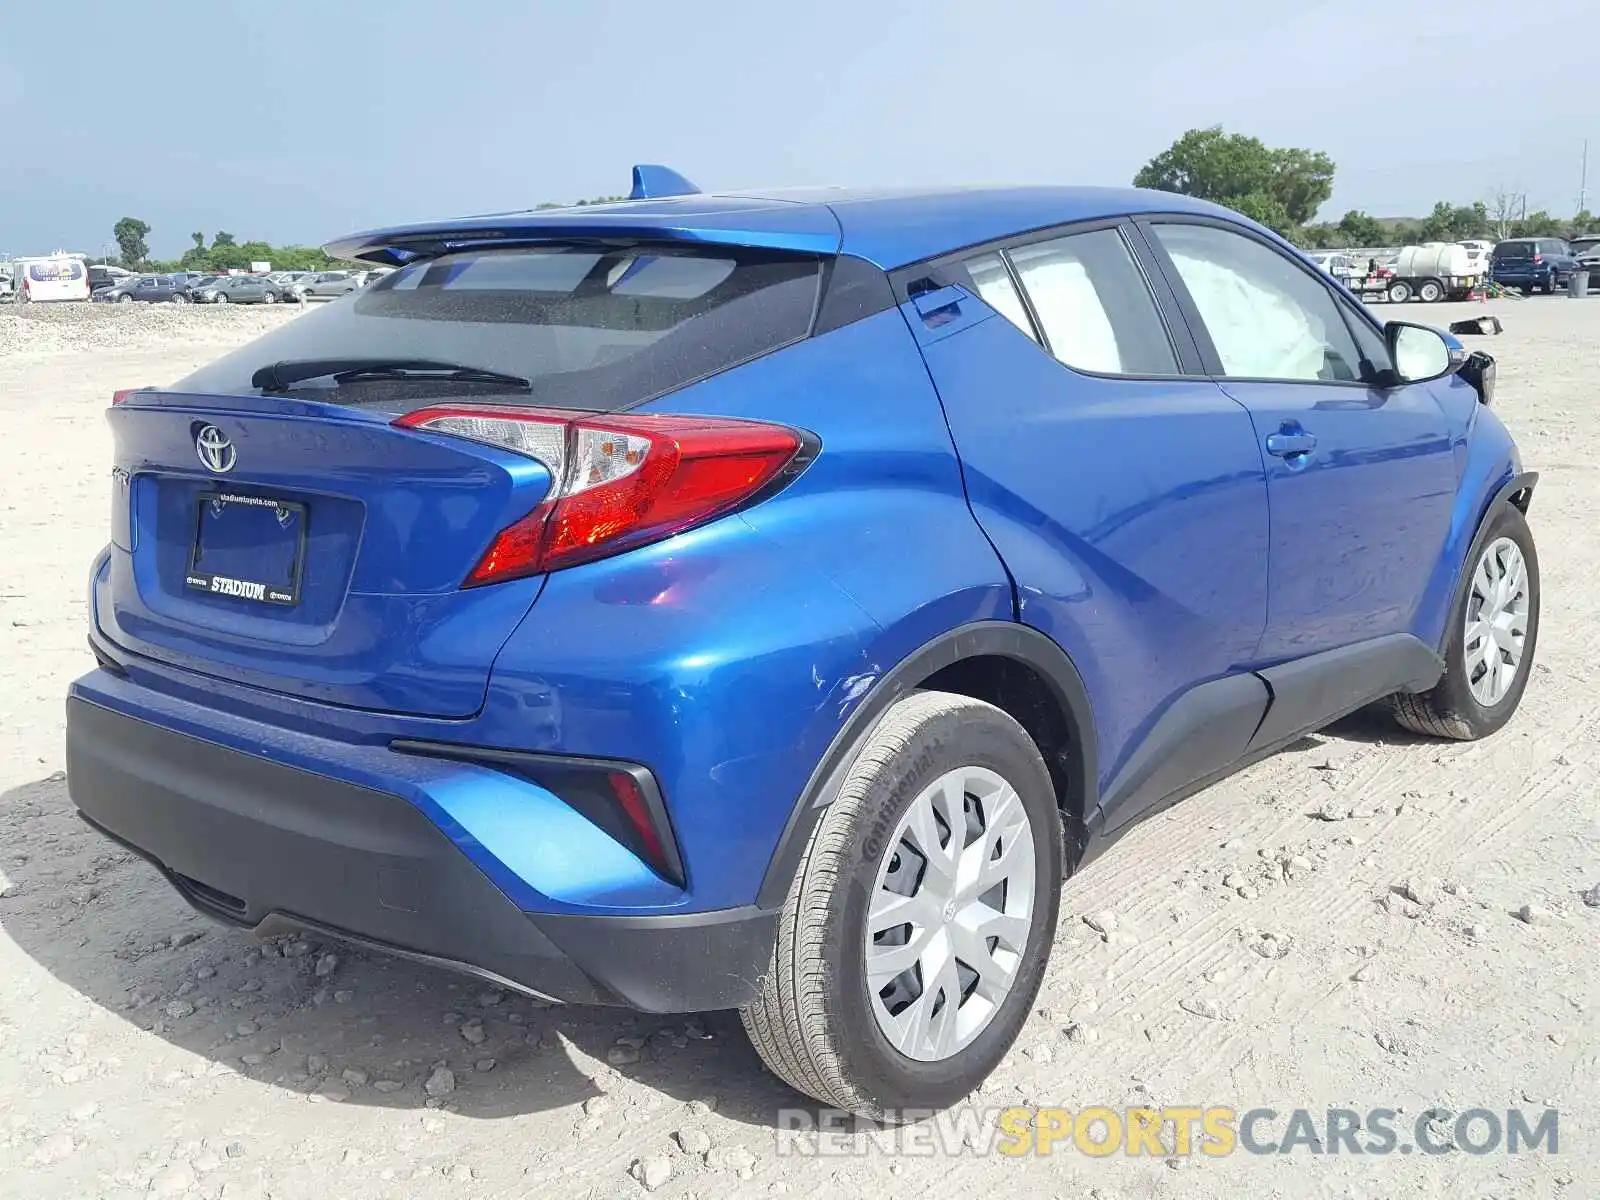 4 Photograph of a damaged car NMTKHMBXXKR099881 TOYOTA C-HR 2019